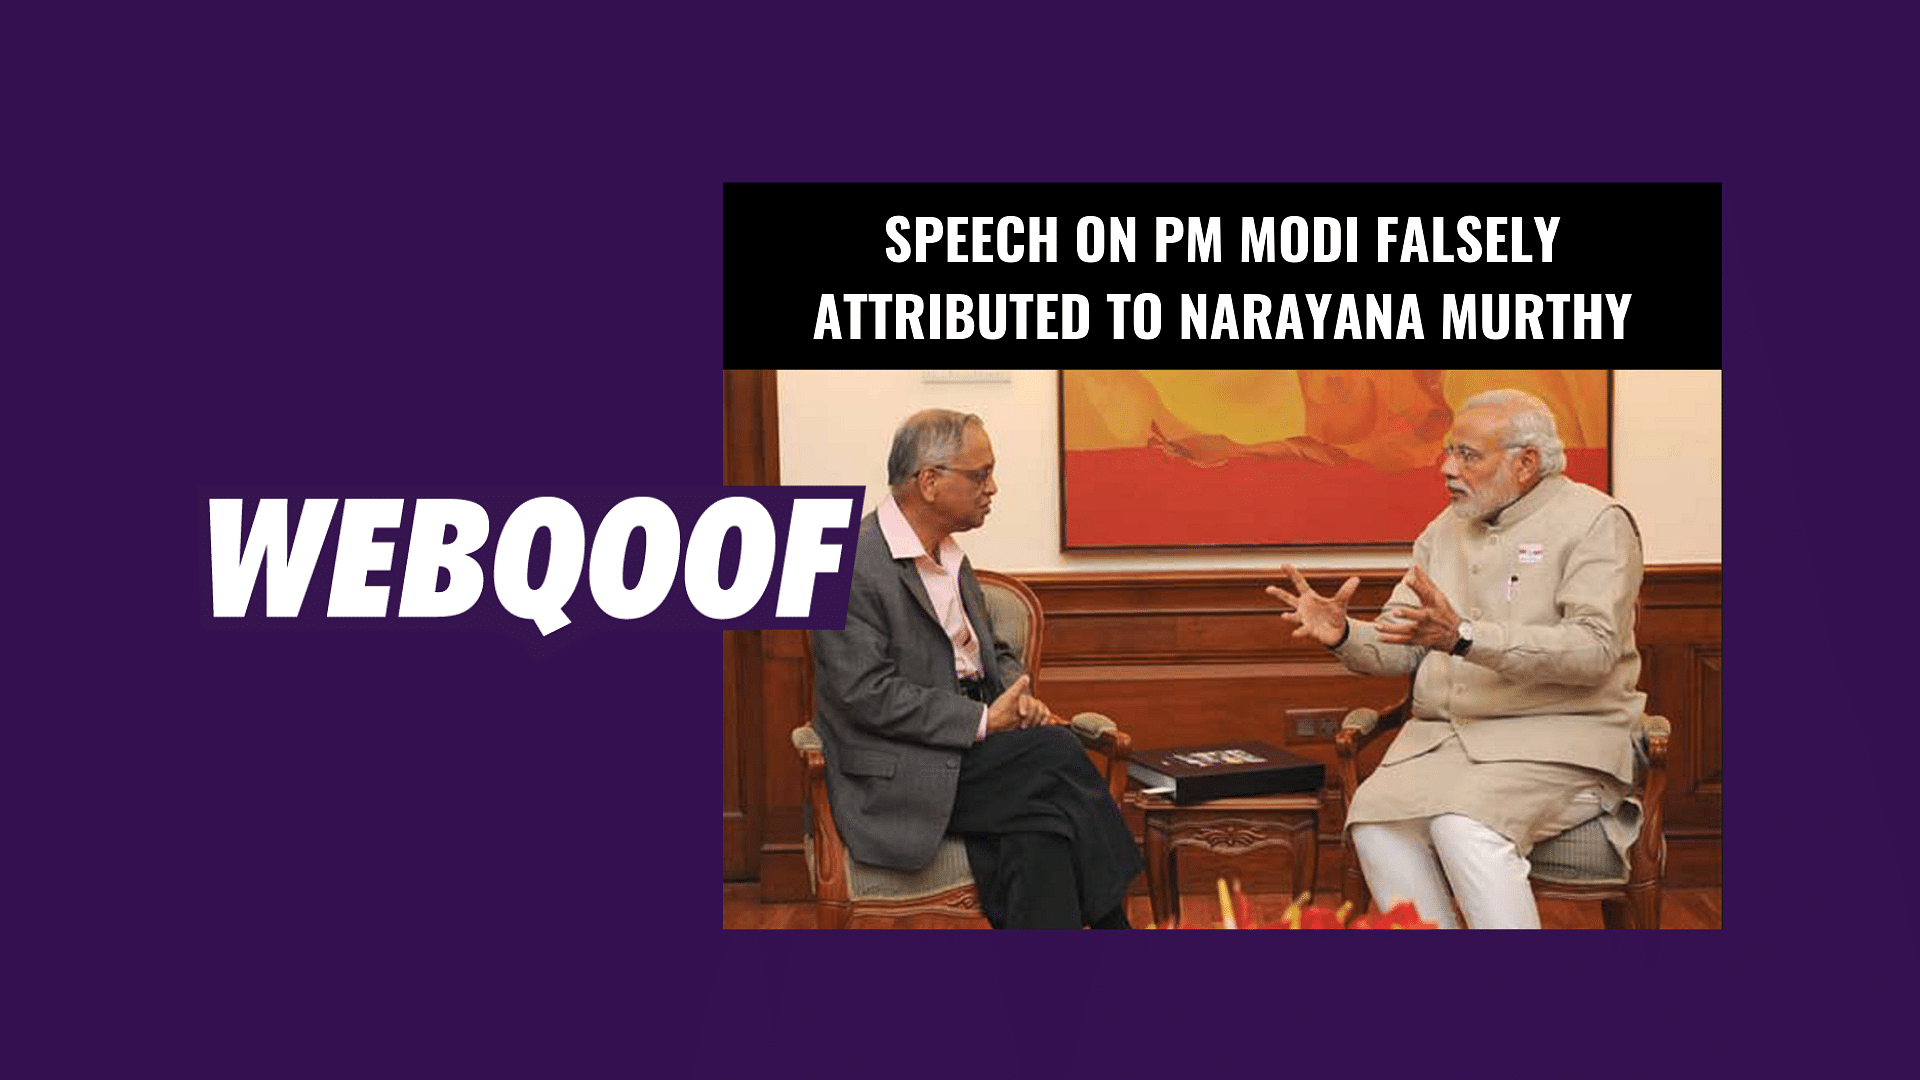 A viral speech on Narendra Modi has been falsely attributed to Infosys co-founder NR Narayana Murthy.